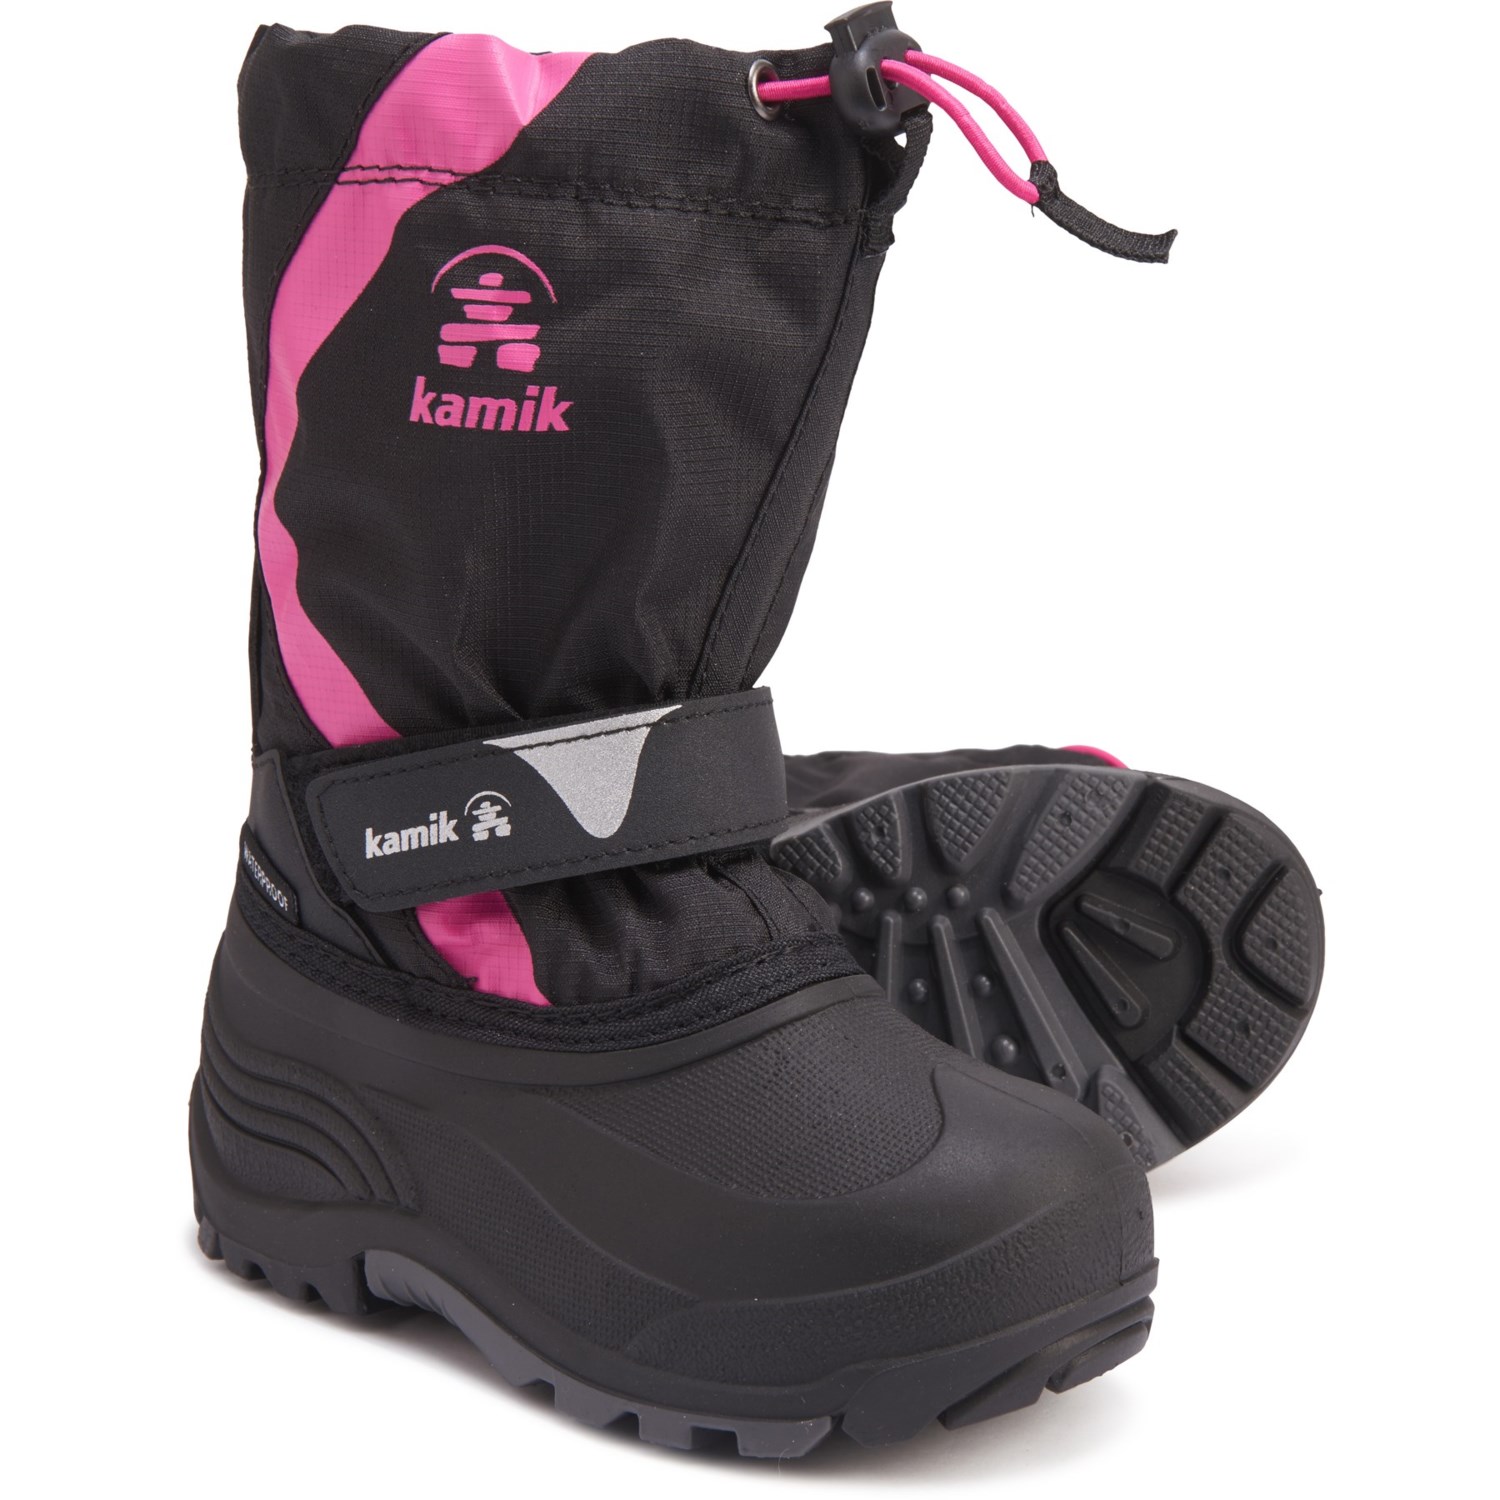 Kamik Snownite Pac Boots (For Girls 